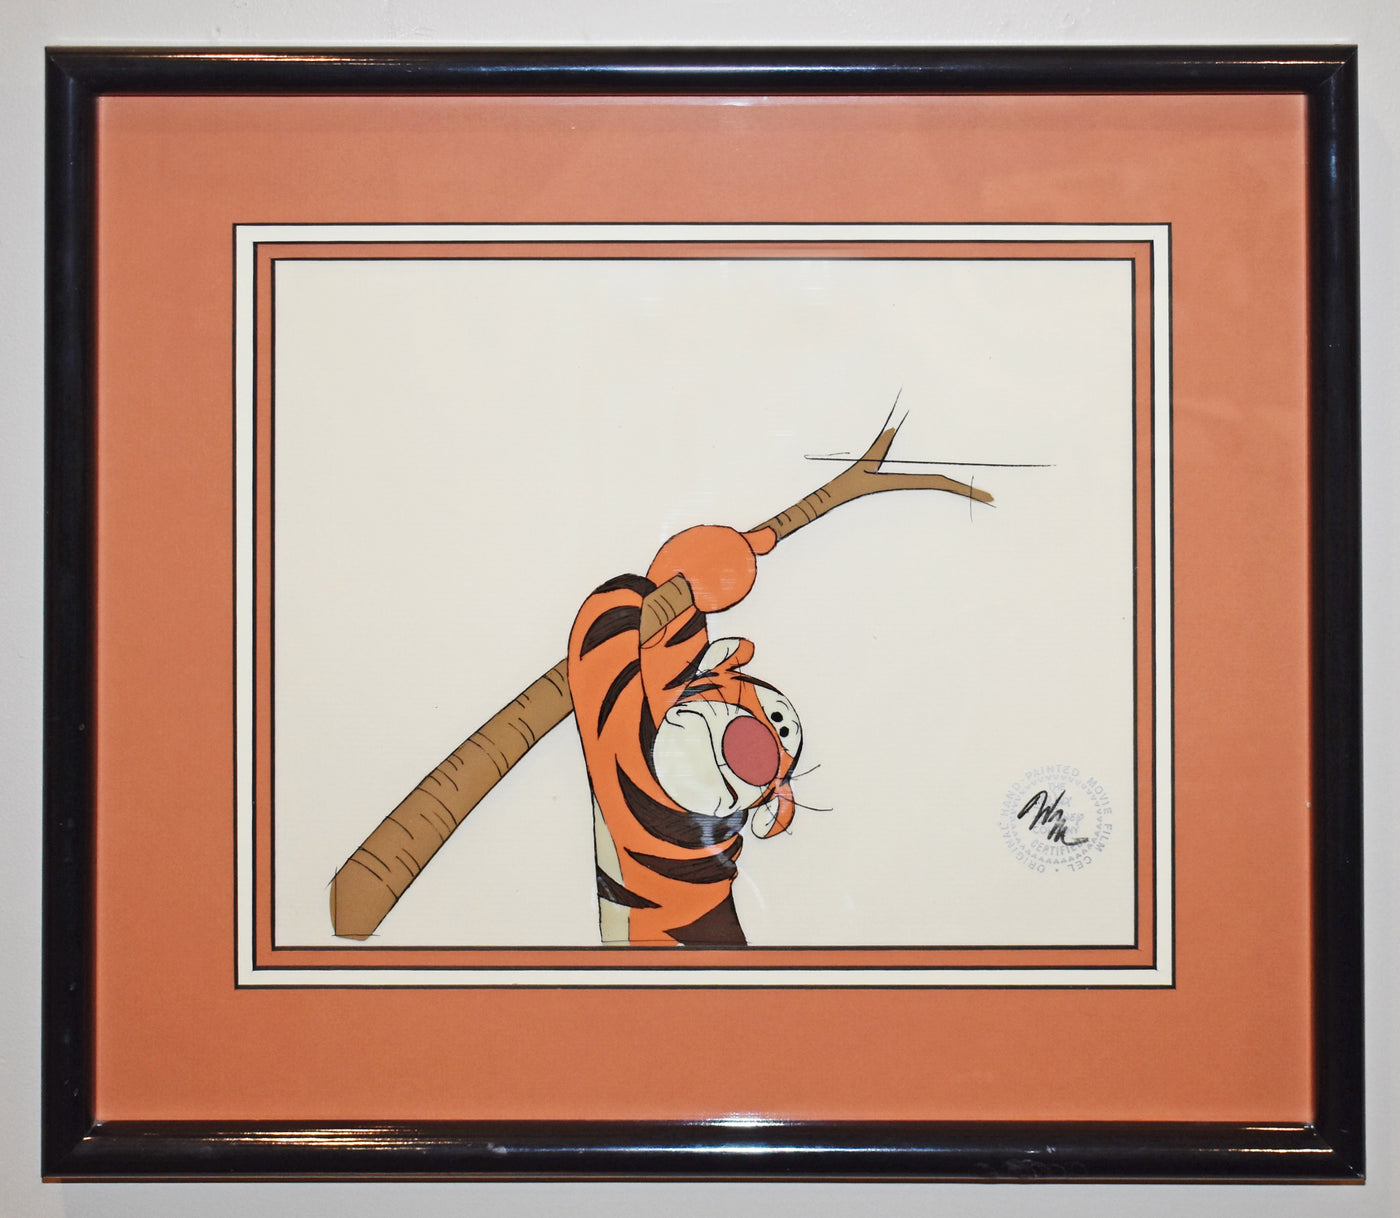 Original Walt Disney Production Cel from "The Many Adventures of Winnie the Pooh" featuring Tigger